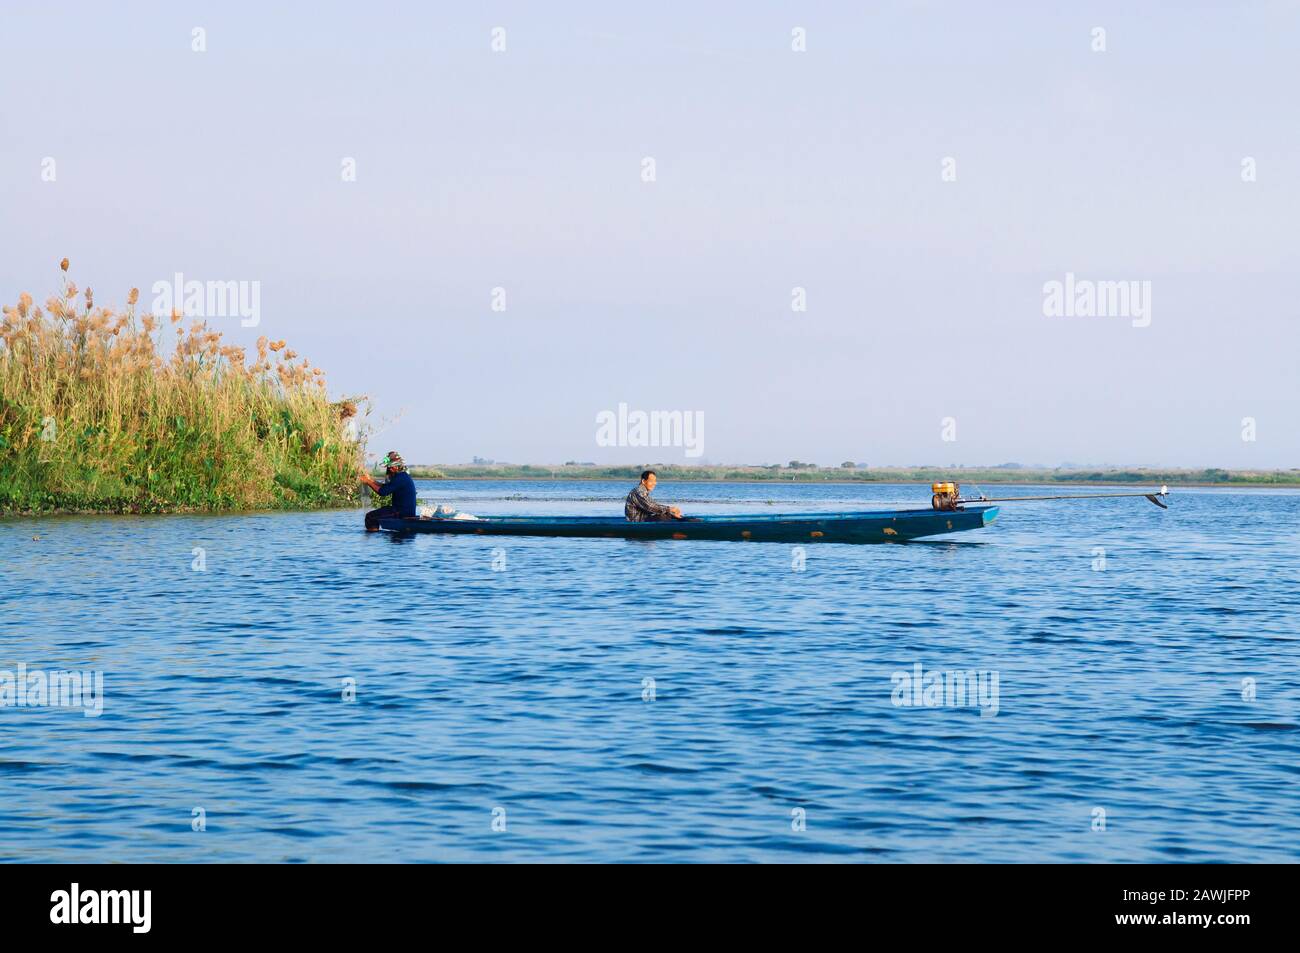 JAN 13, 2019 Udonthani, Thailand - Thai fisheman boat in peaceful Nong Harn lake, Udonthani - Thailand. Wooden boat under beautiful morning sky over l Stock Photo